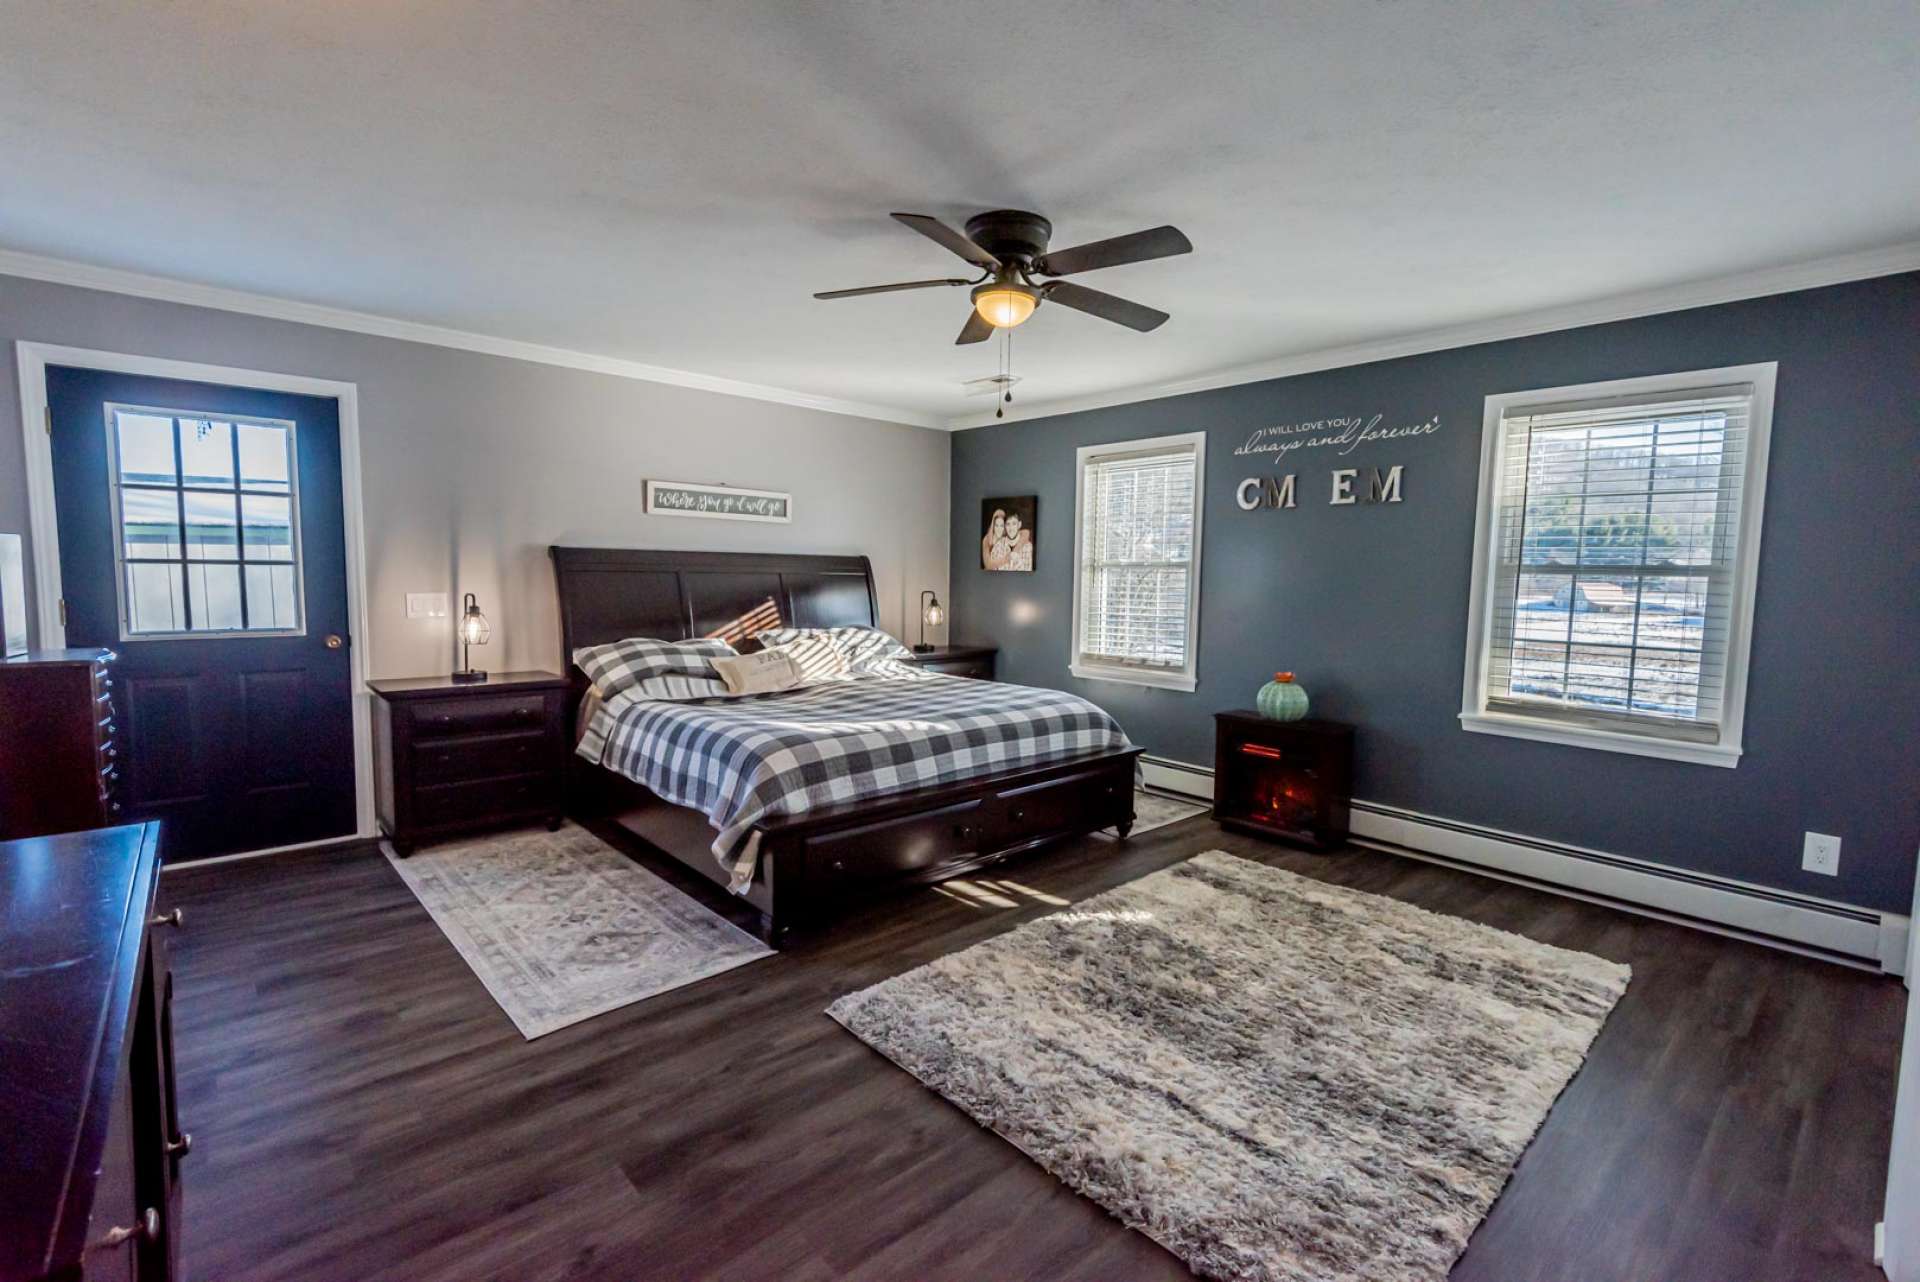 Escape to your own retreat in the spacious main level master suite featuring his and hers baths and closets.